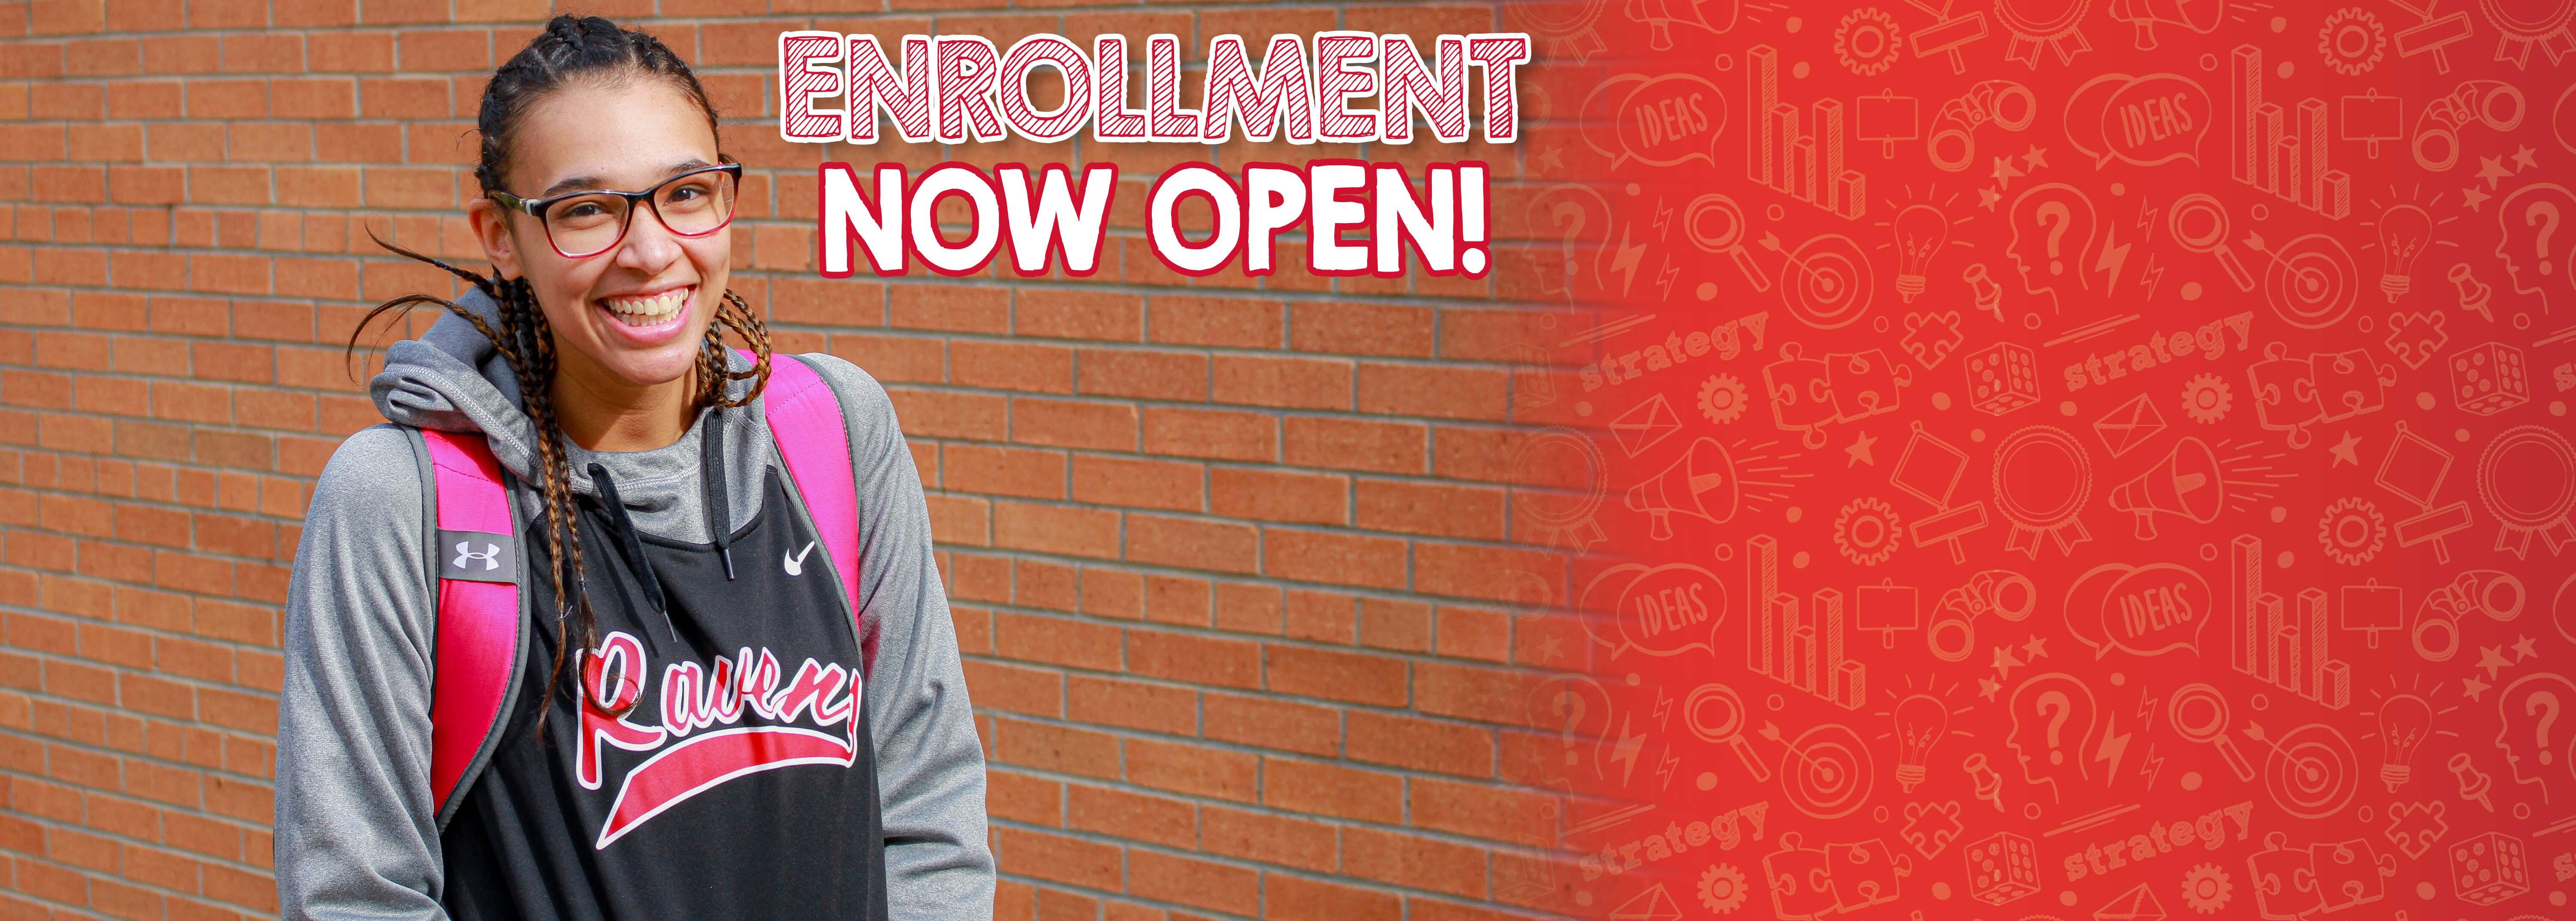 Student Posing for a Photo With Text Stating That Spring Enrollment Now Open